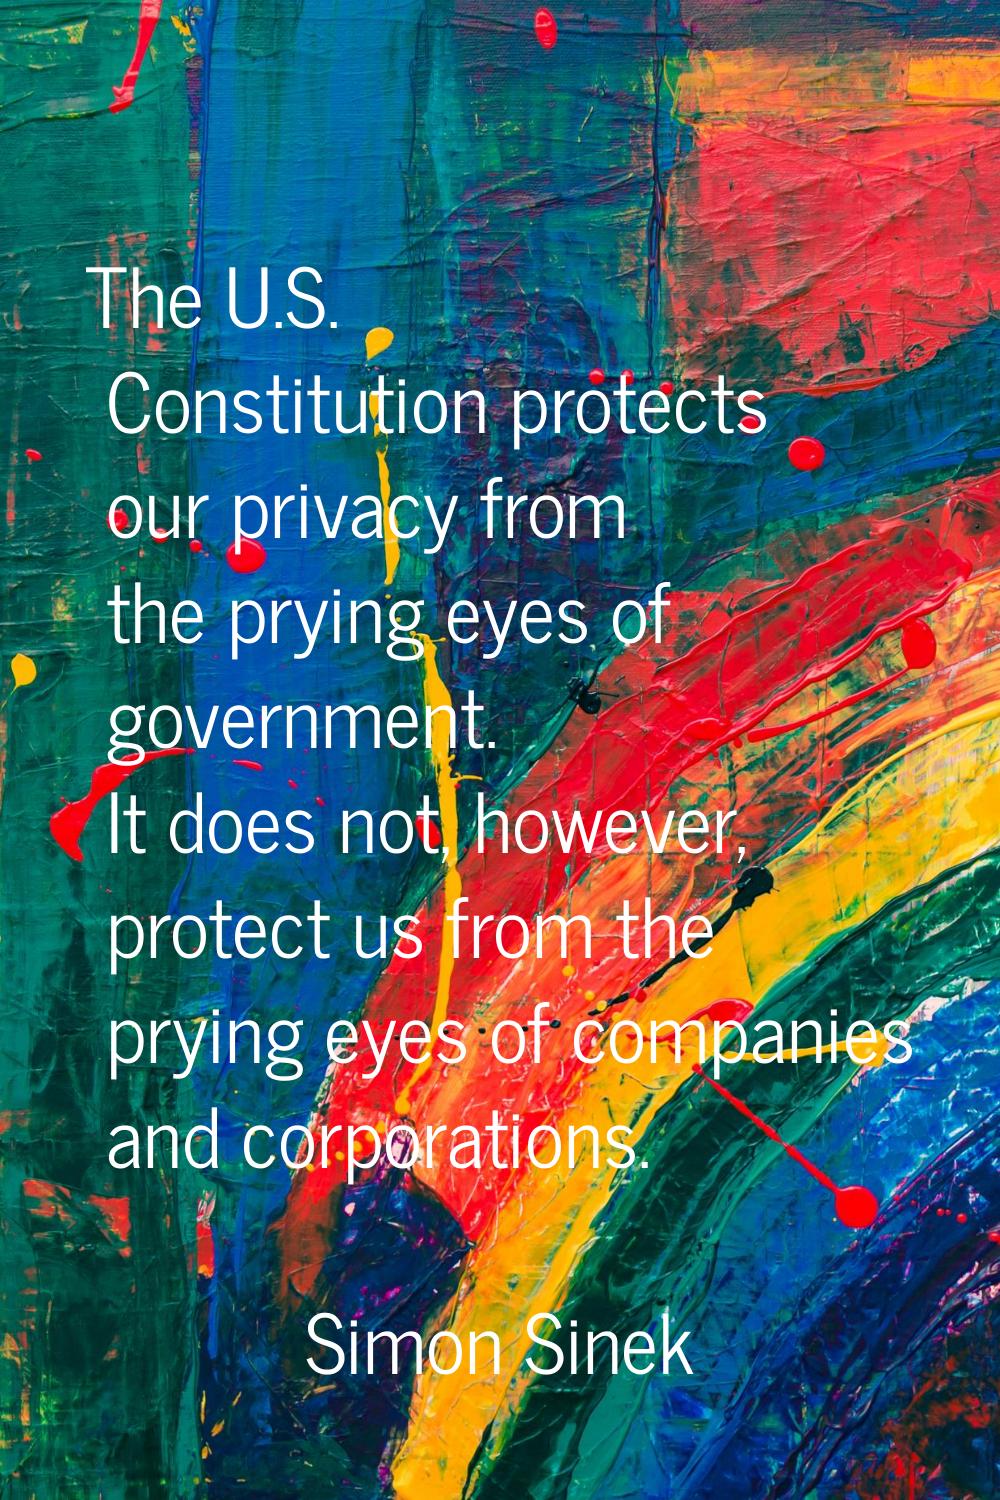 The U.S. Constitution protects our privacy from the prying eyes of government. It does not, however